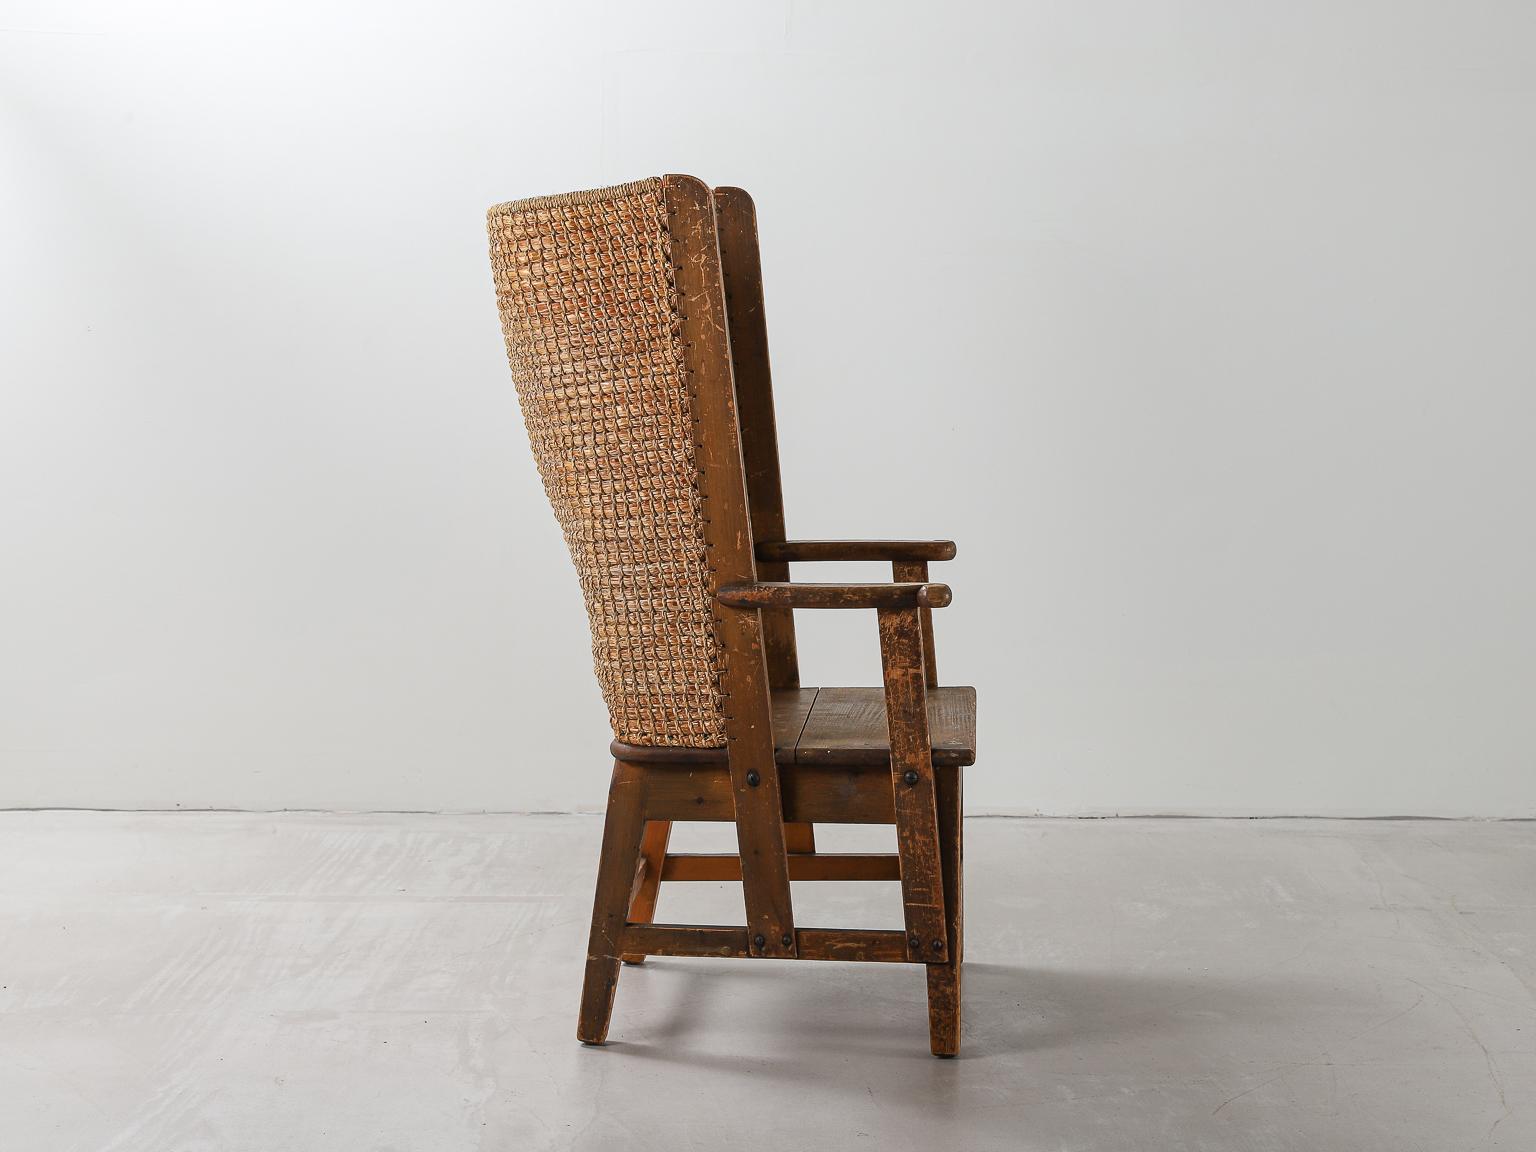 Hand-Carved Scottish Late 19th Early 20th Century Wood and Oat Straw Orkney Chair